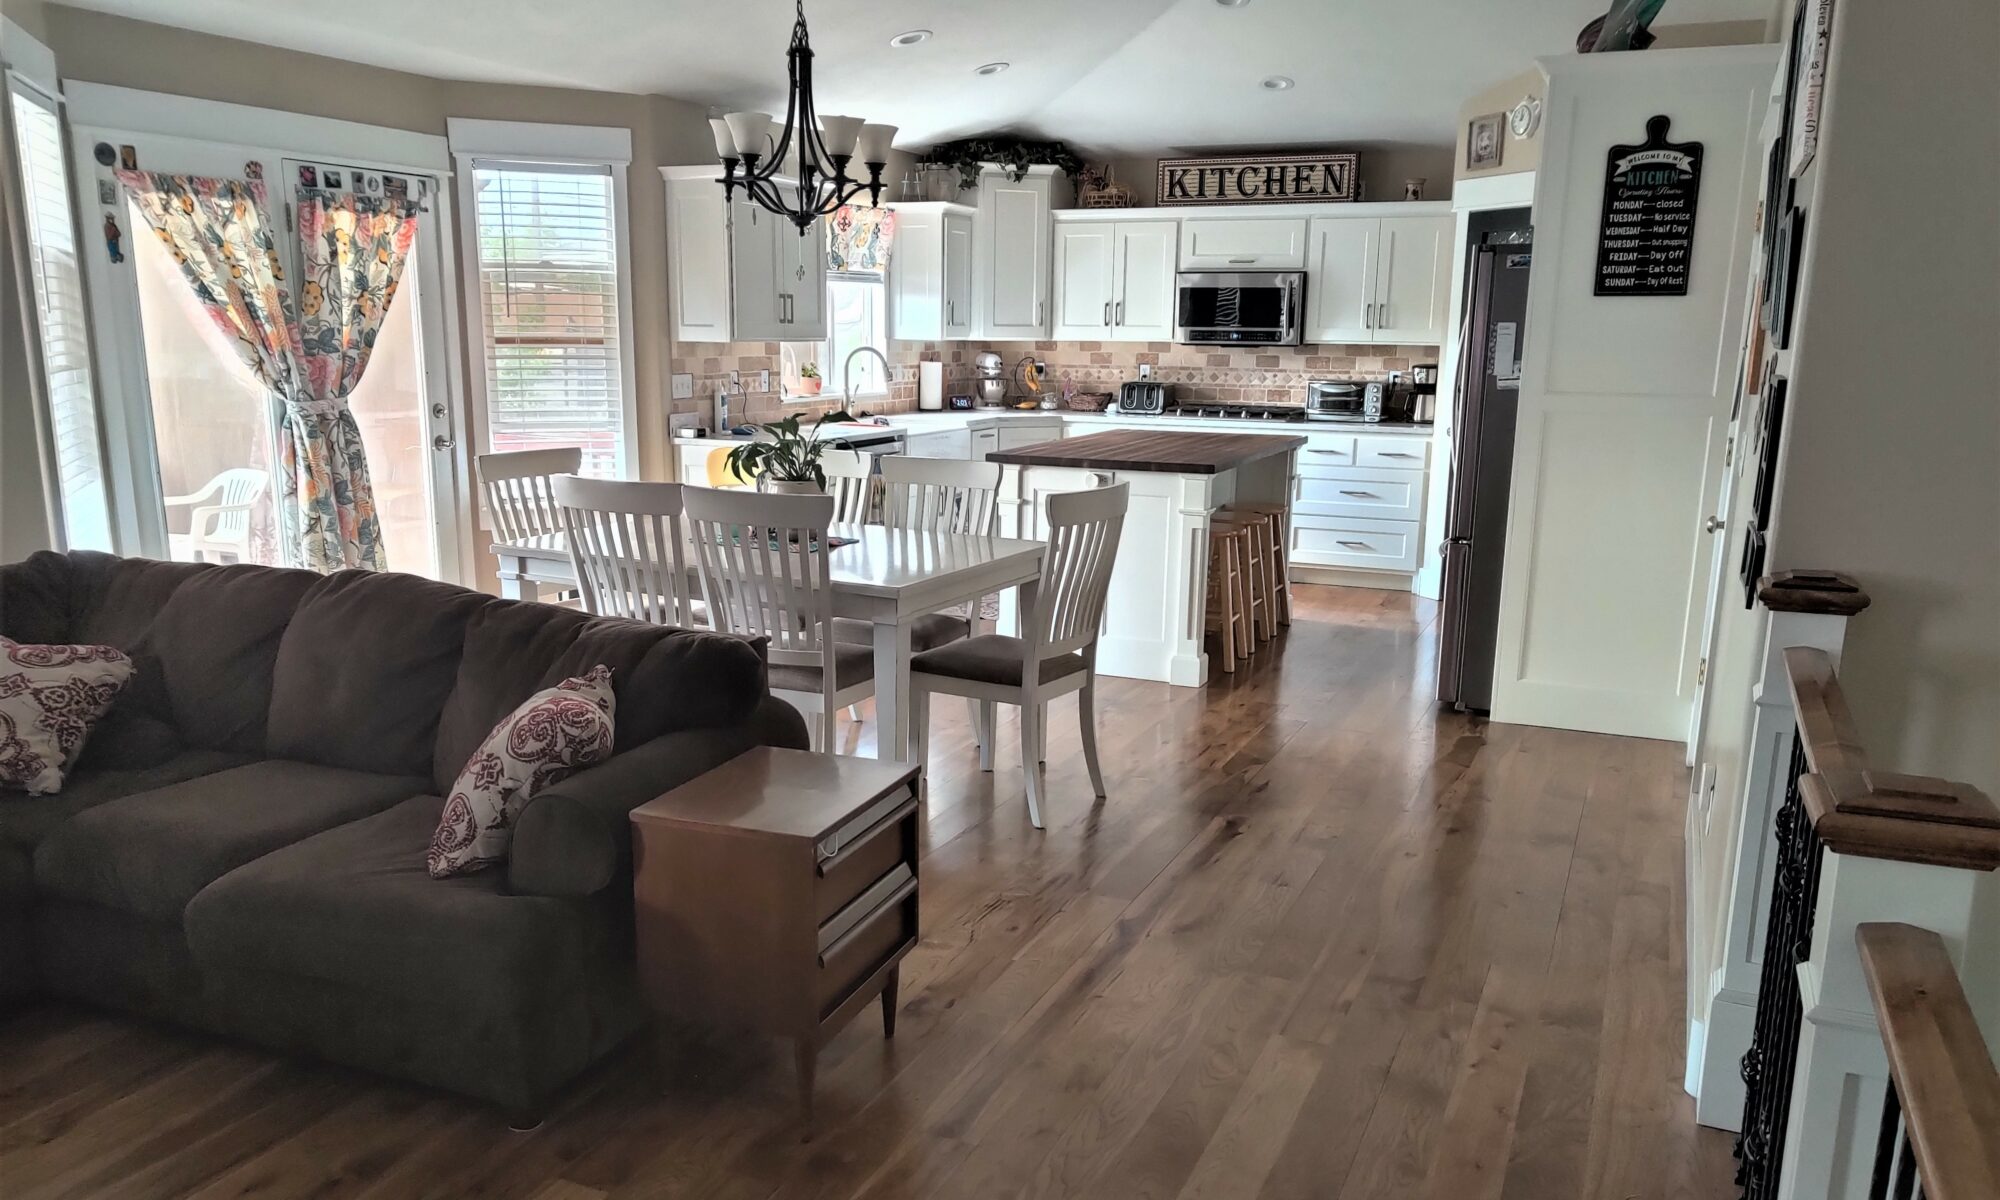 a hickory solid wood floor of traditional design, with special walnut colored stain, installed by Hardwood Floorist in a customer's kitchen. Clean white, cabinetry and counter tops surround the back half of the kitchen, there is an island in the center and a large white table with chairs in the front half.